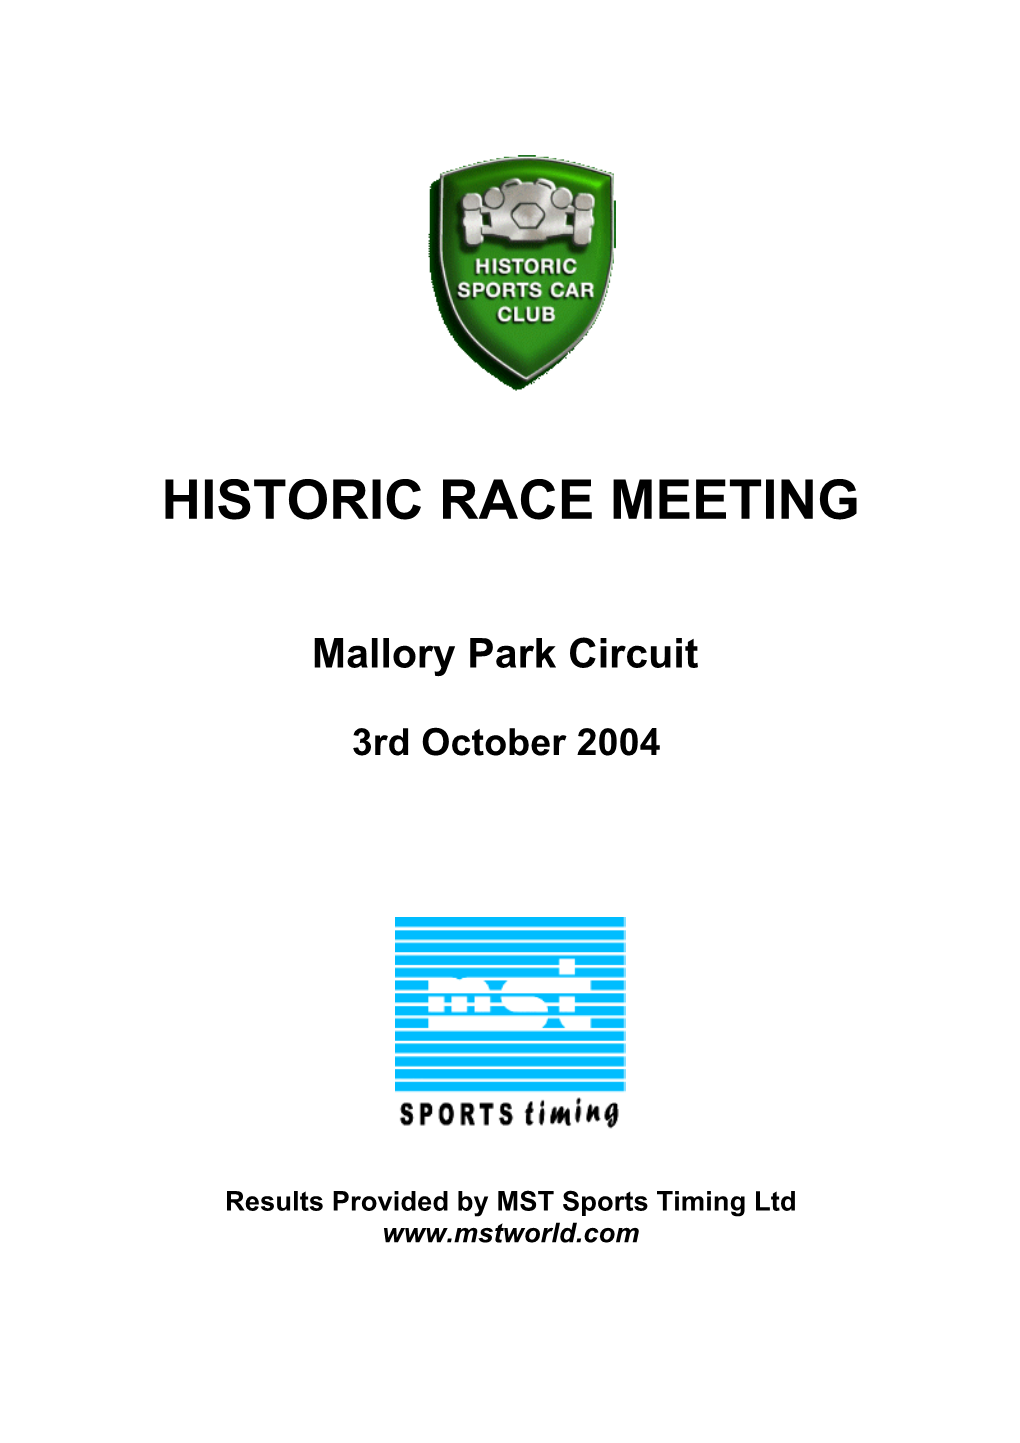 October 3 Mallory Park